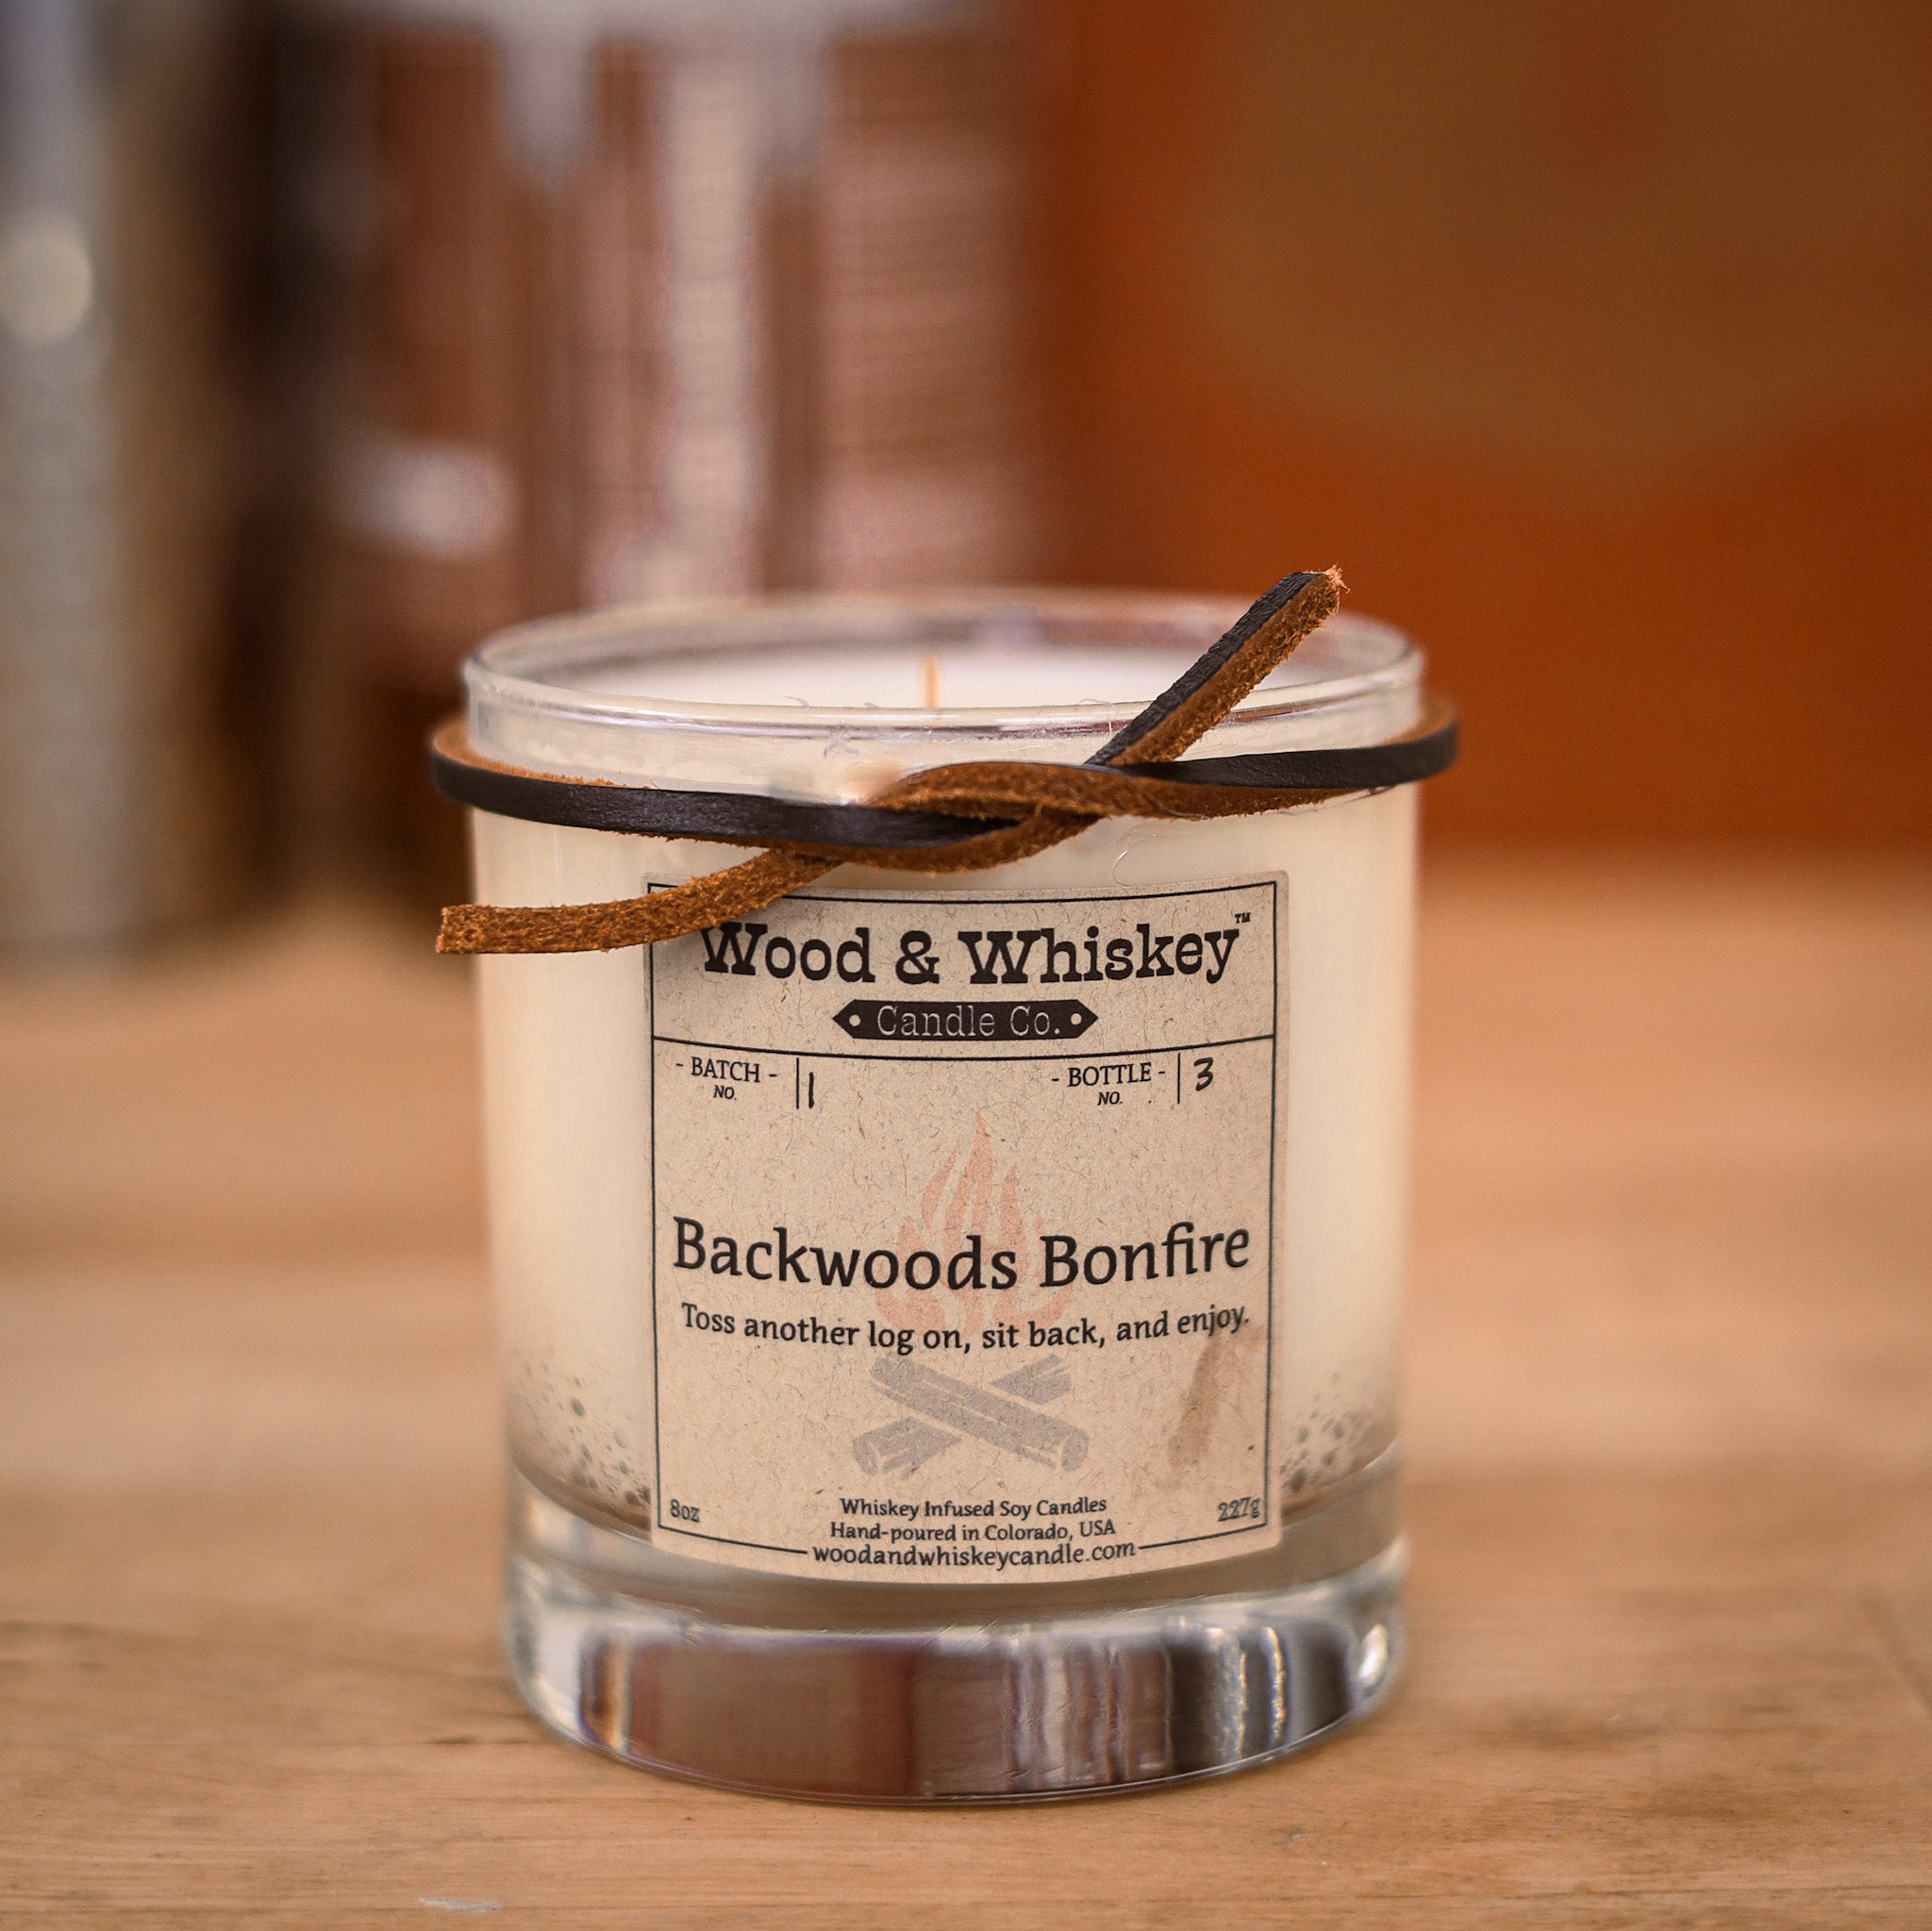 Backwoods Bonfire | 8 oz Whiskey Infused Cocktail Glass Candle